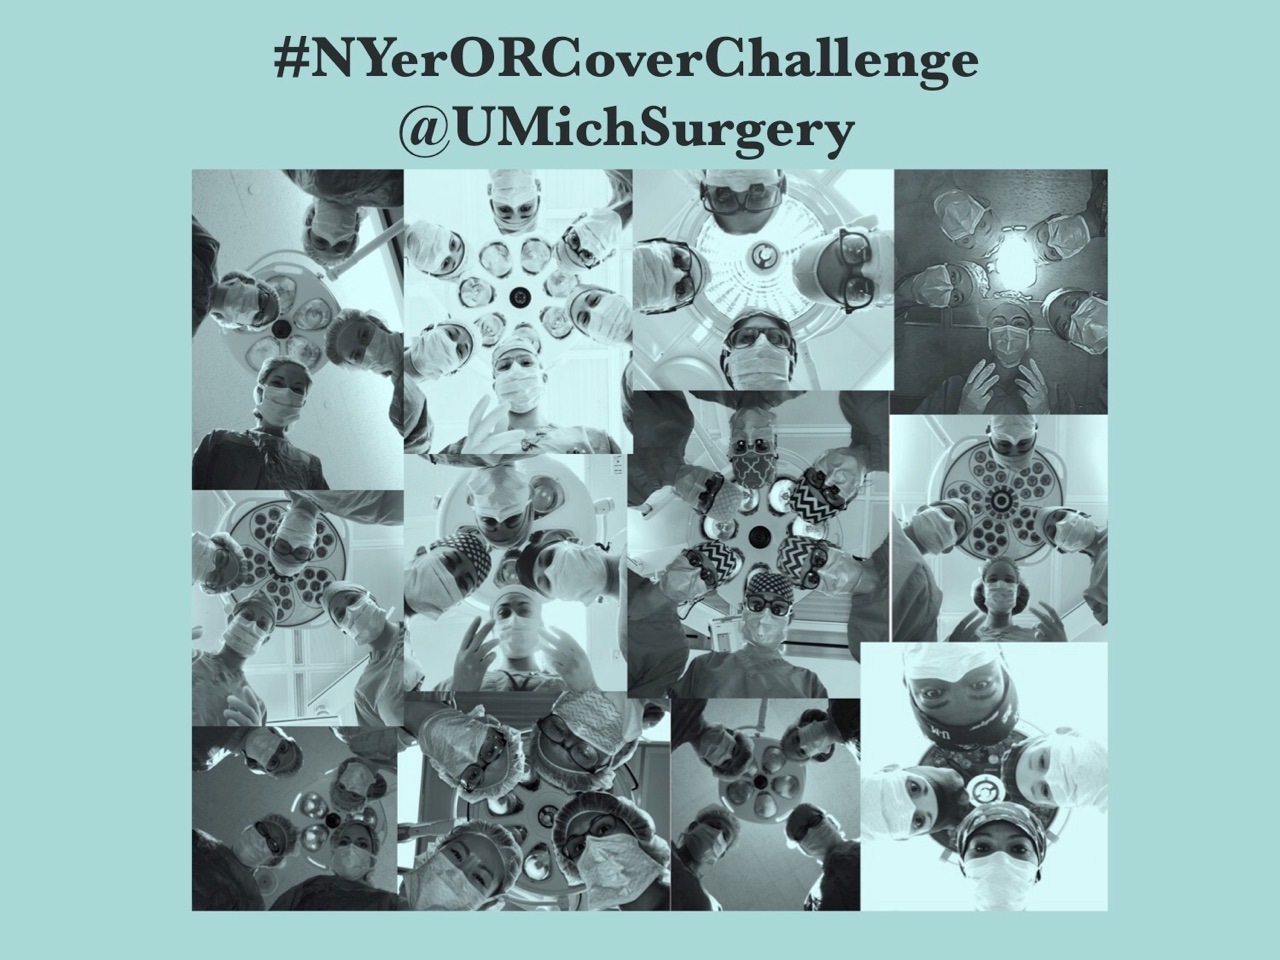 Collage of women surgeons re-creating the New Yorker cover #NYerORCoverChallenge @UMichSurgery